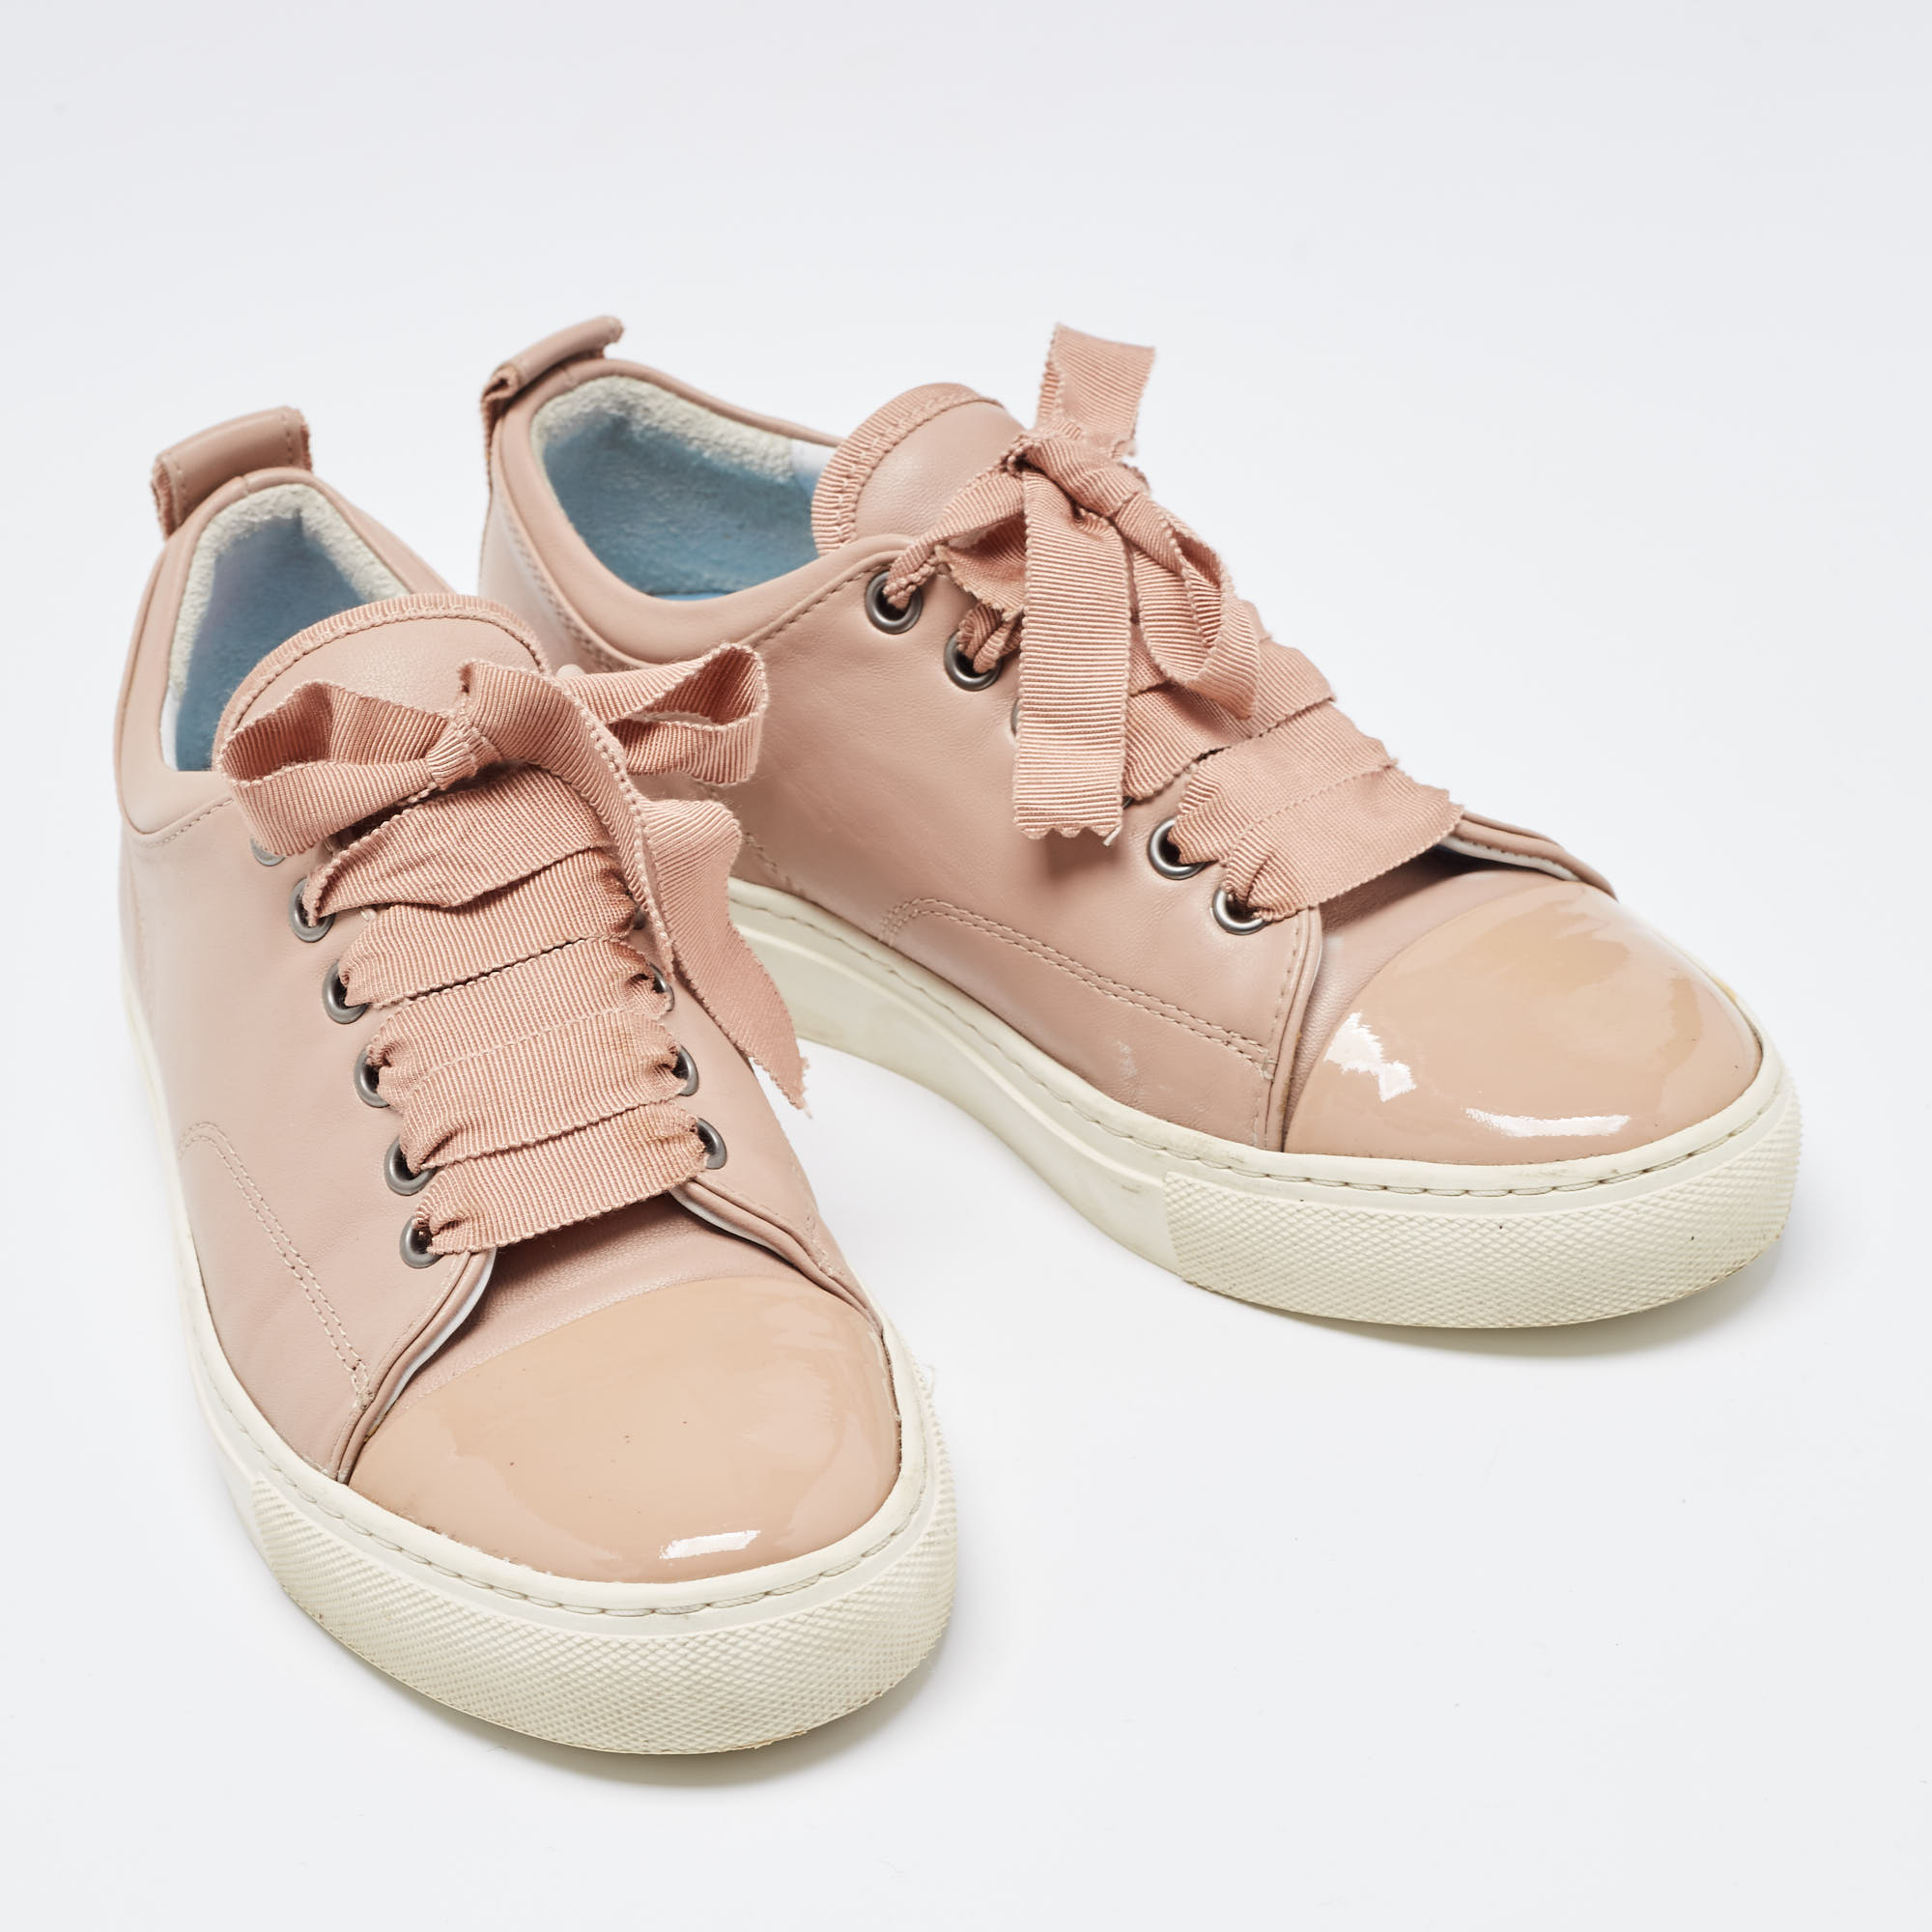 Lanvin Dusty Pink Leather And Patent Cap Toe Low Top Sneakers Size 36